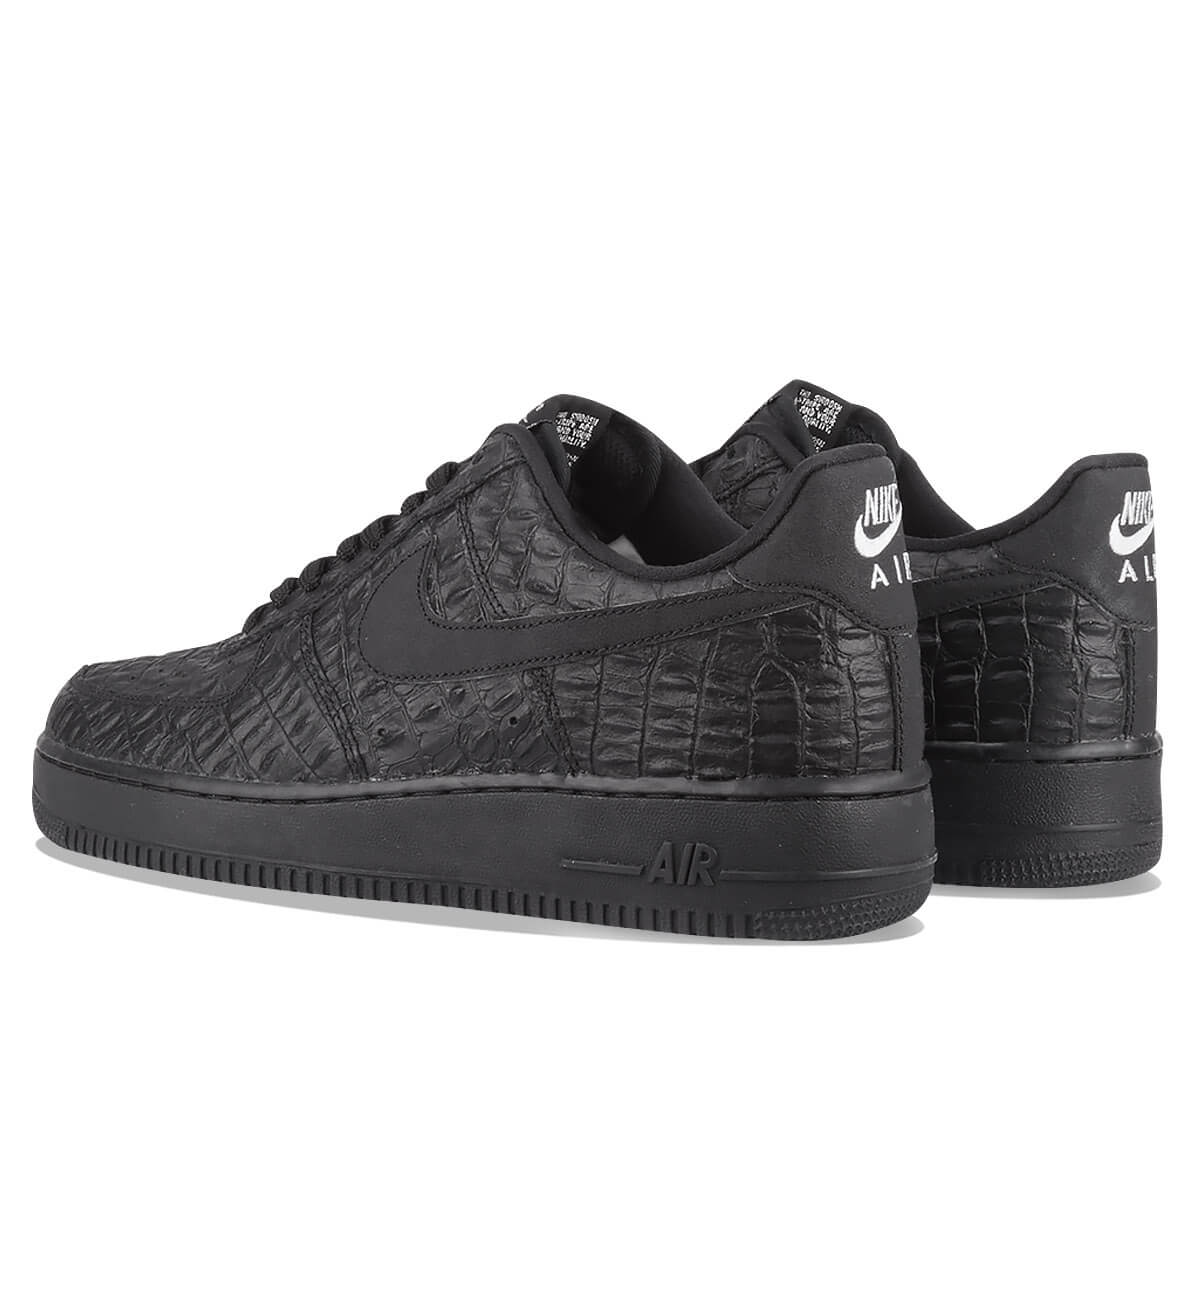 Nike Air Force 1 LV8 Croc Black | Where To | 718152-007 | The Sole Supplier